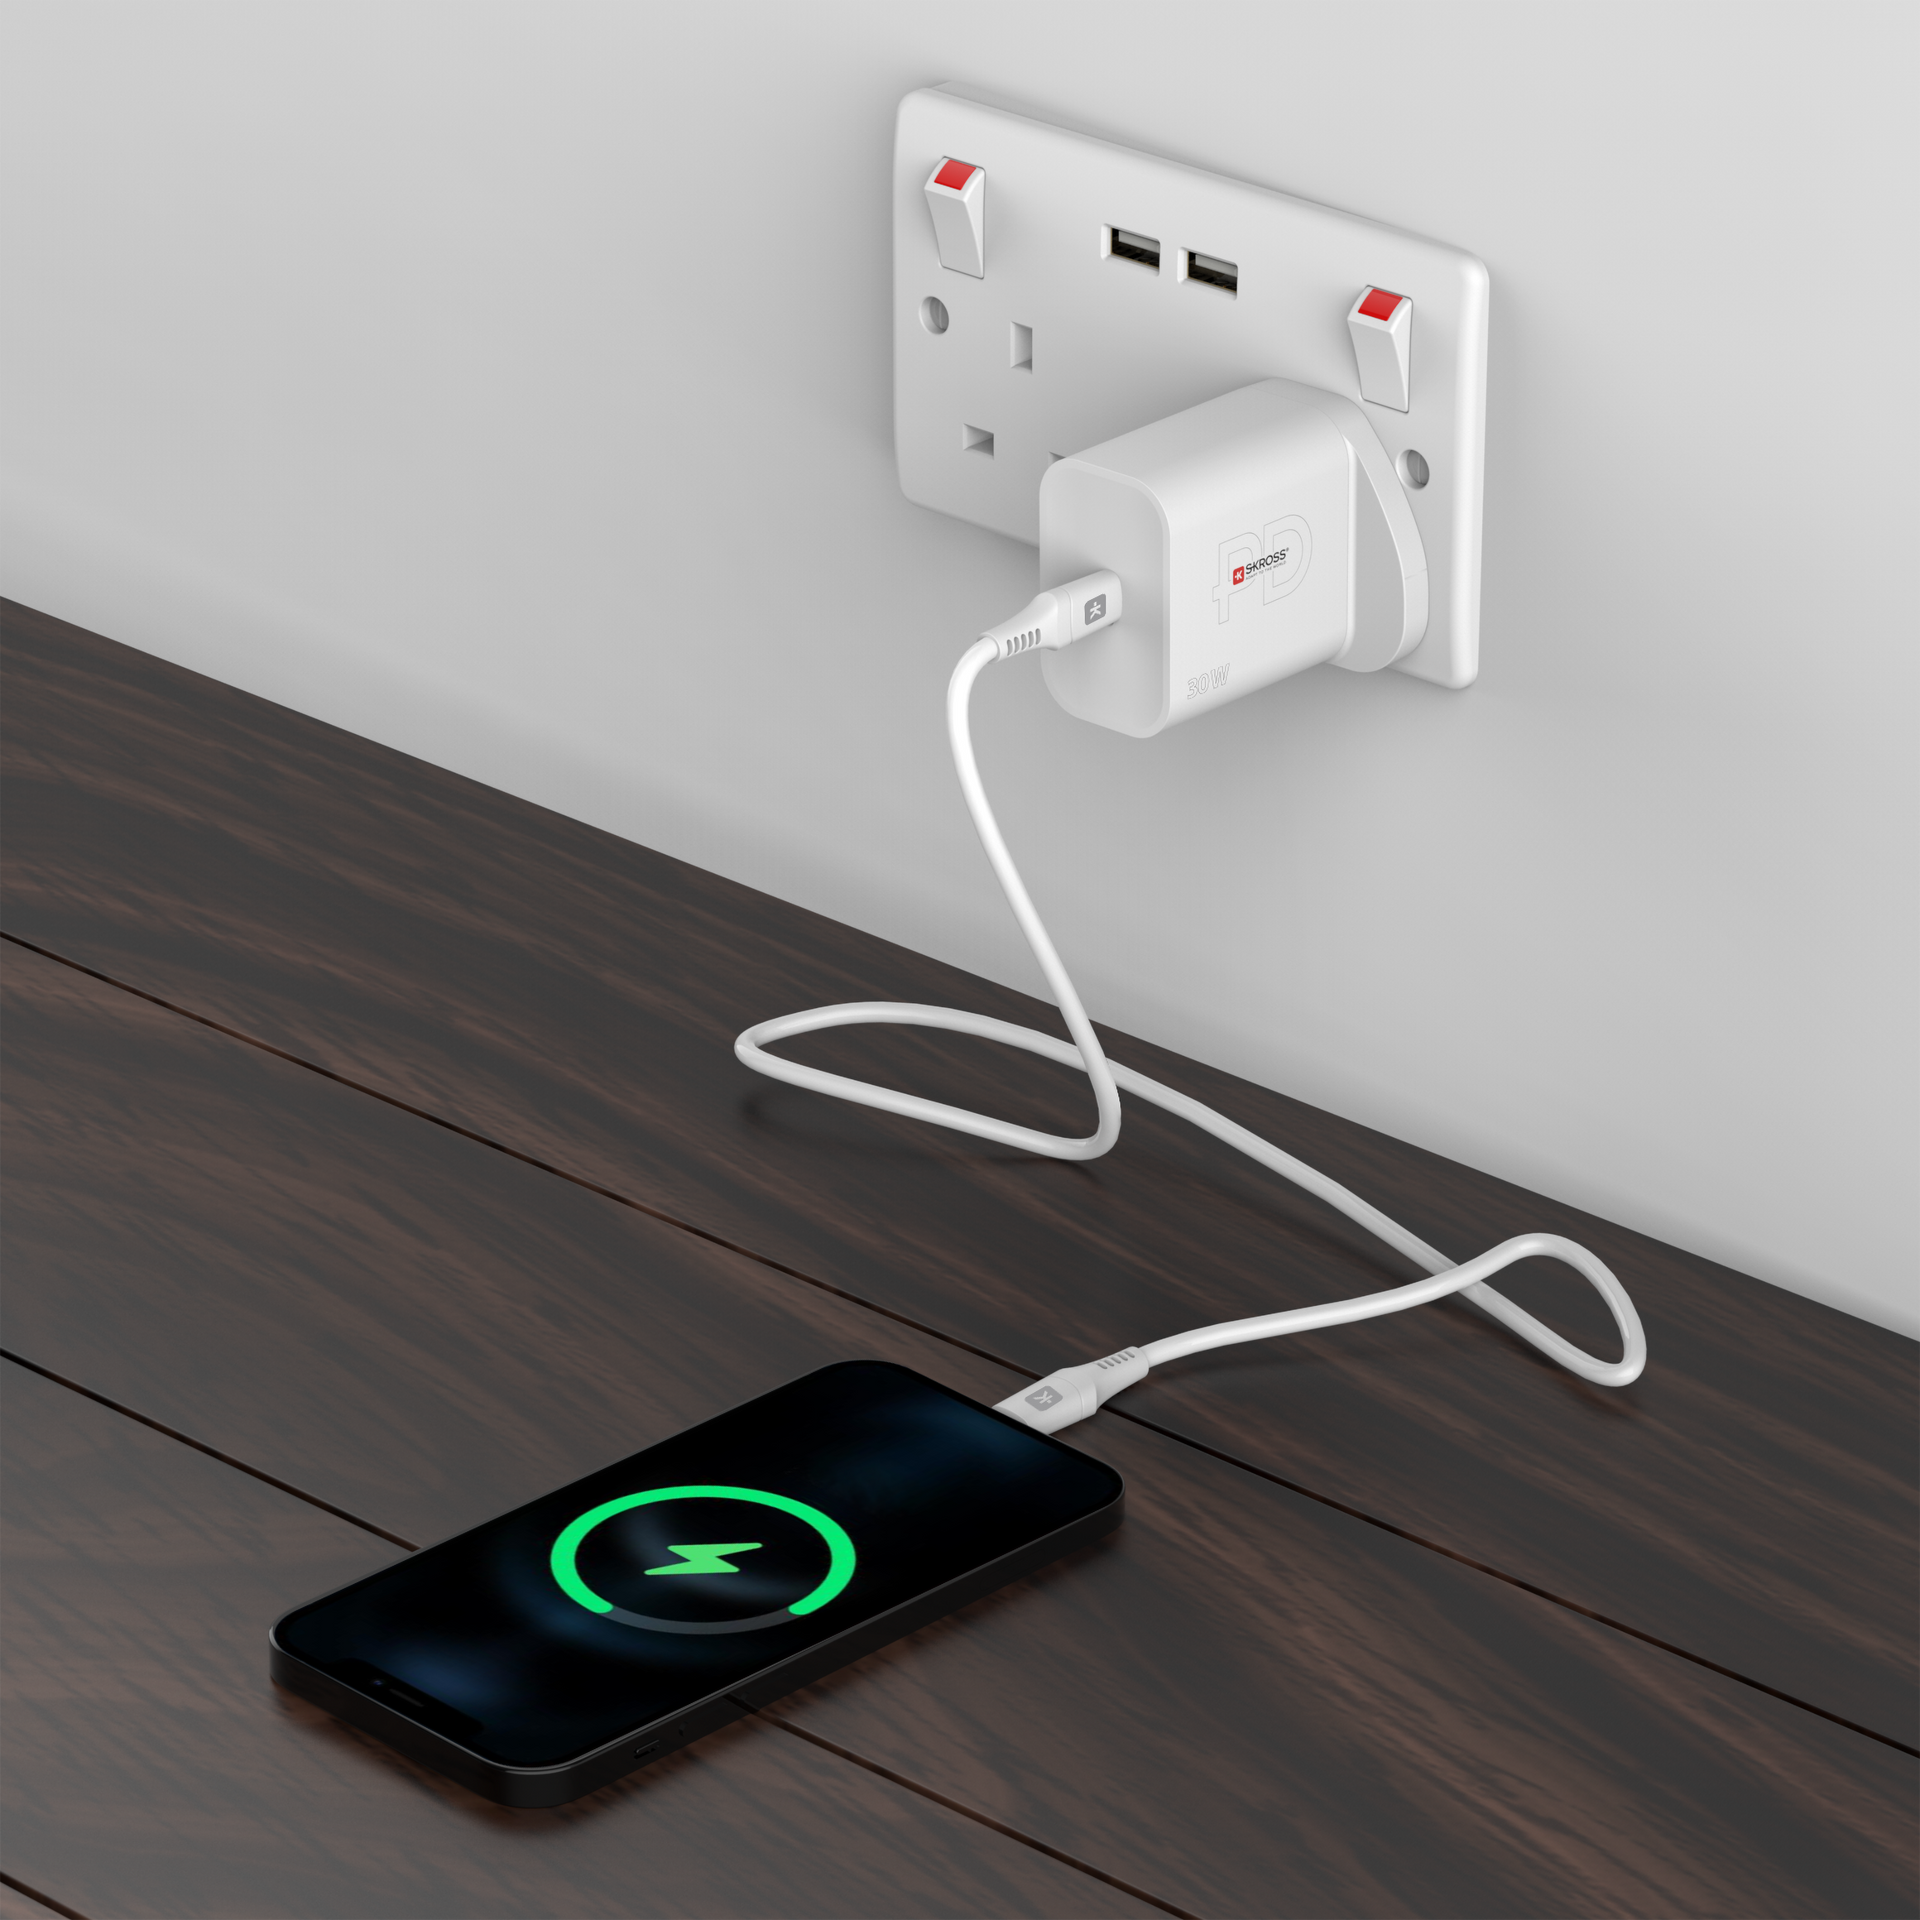 Skross USB Charger. Power Charger UK charging phone